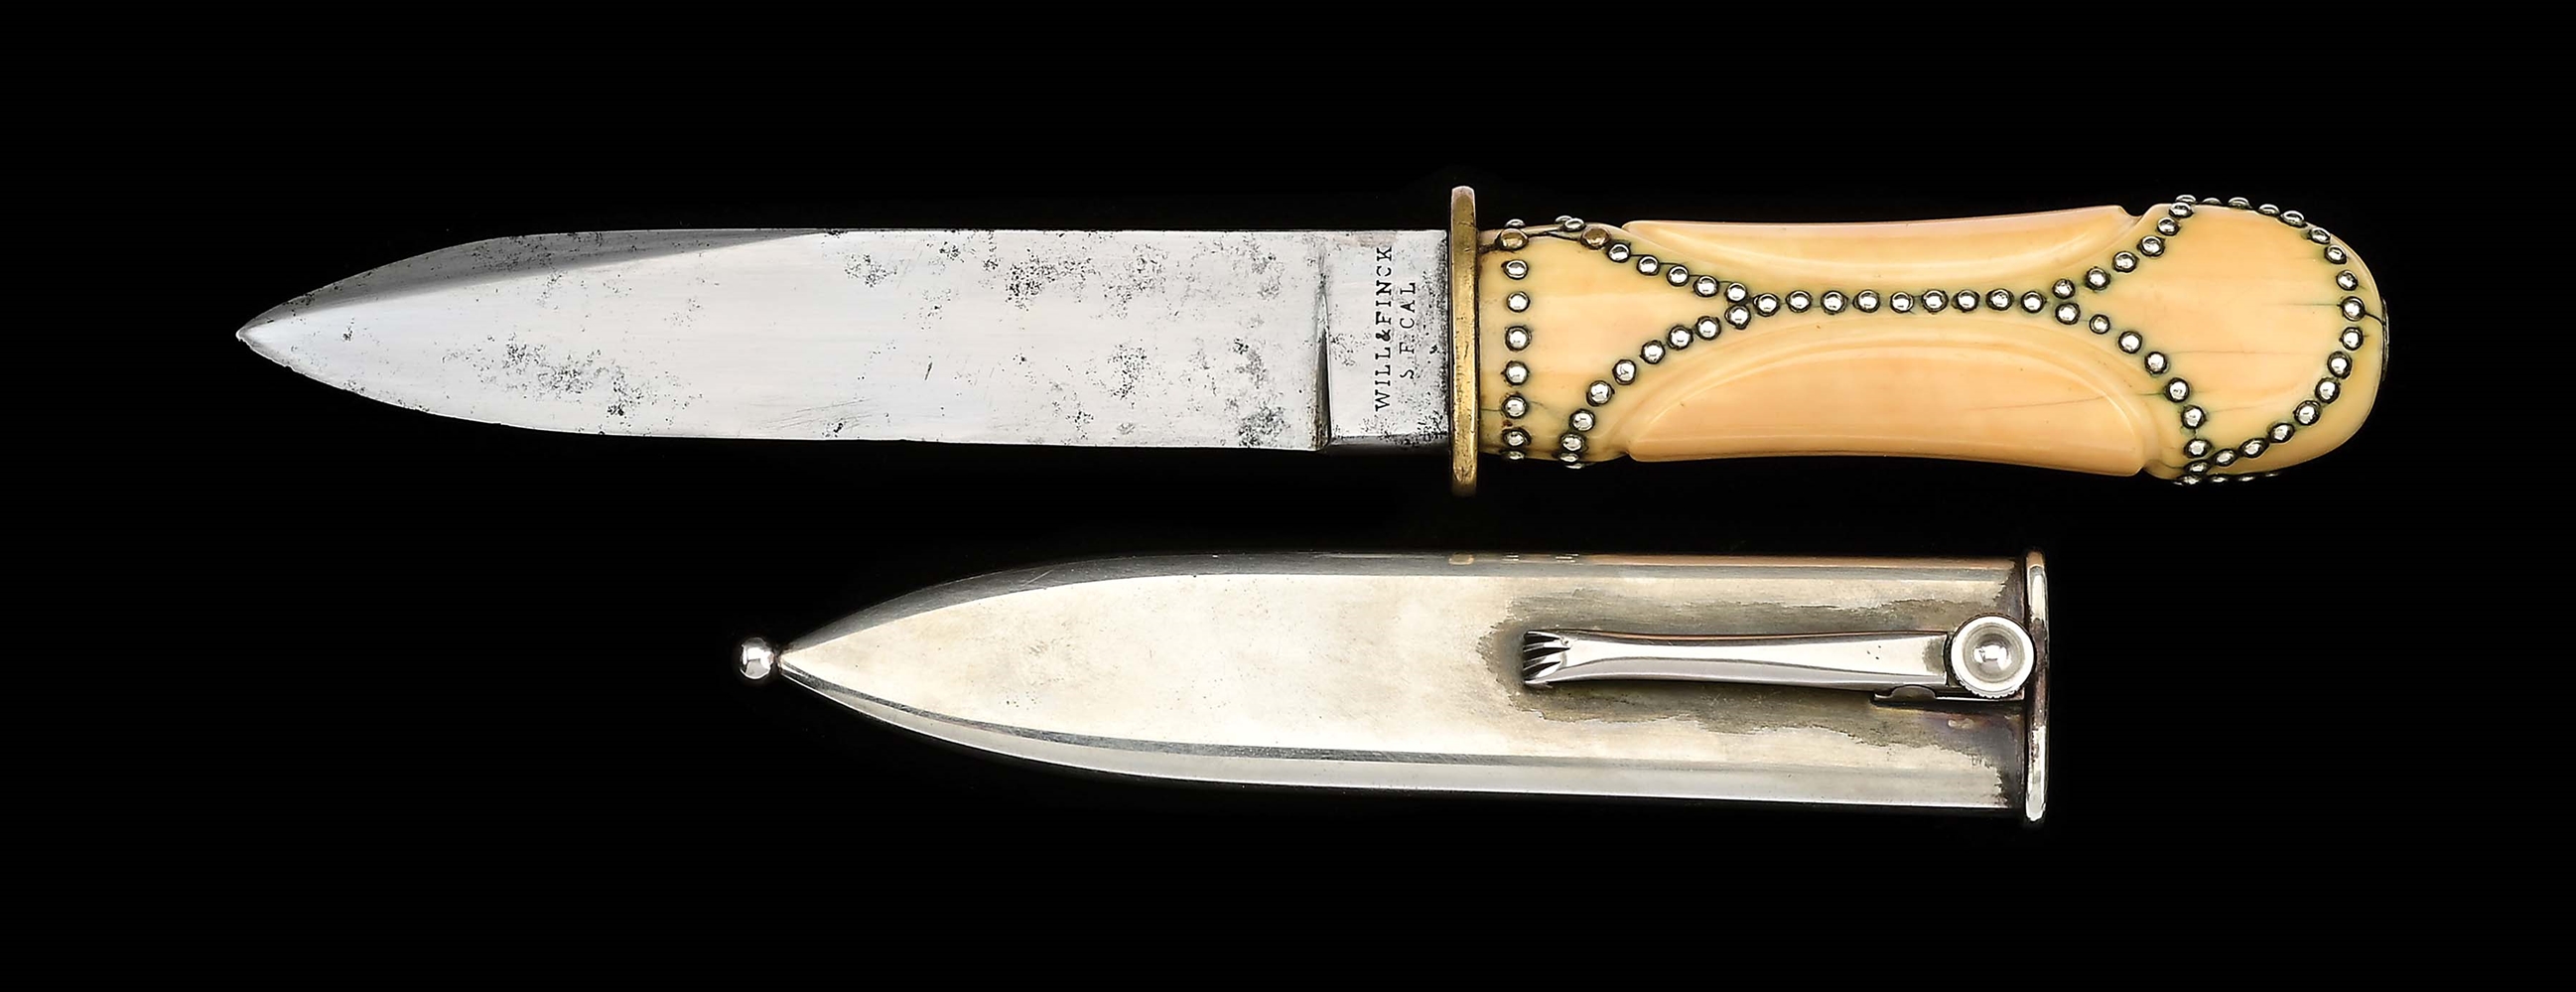 HIGHLY DESIREABLE WILL & FINCK "100 PIN" SAN FRANCISCO KNIFE.